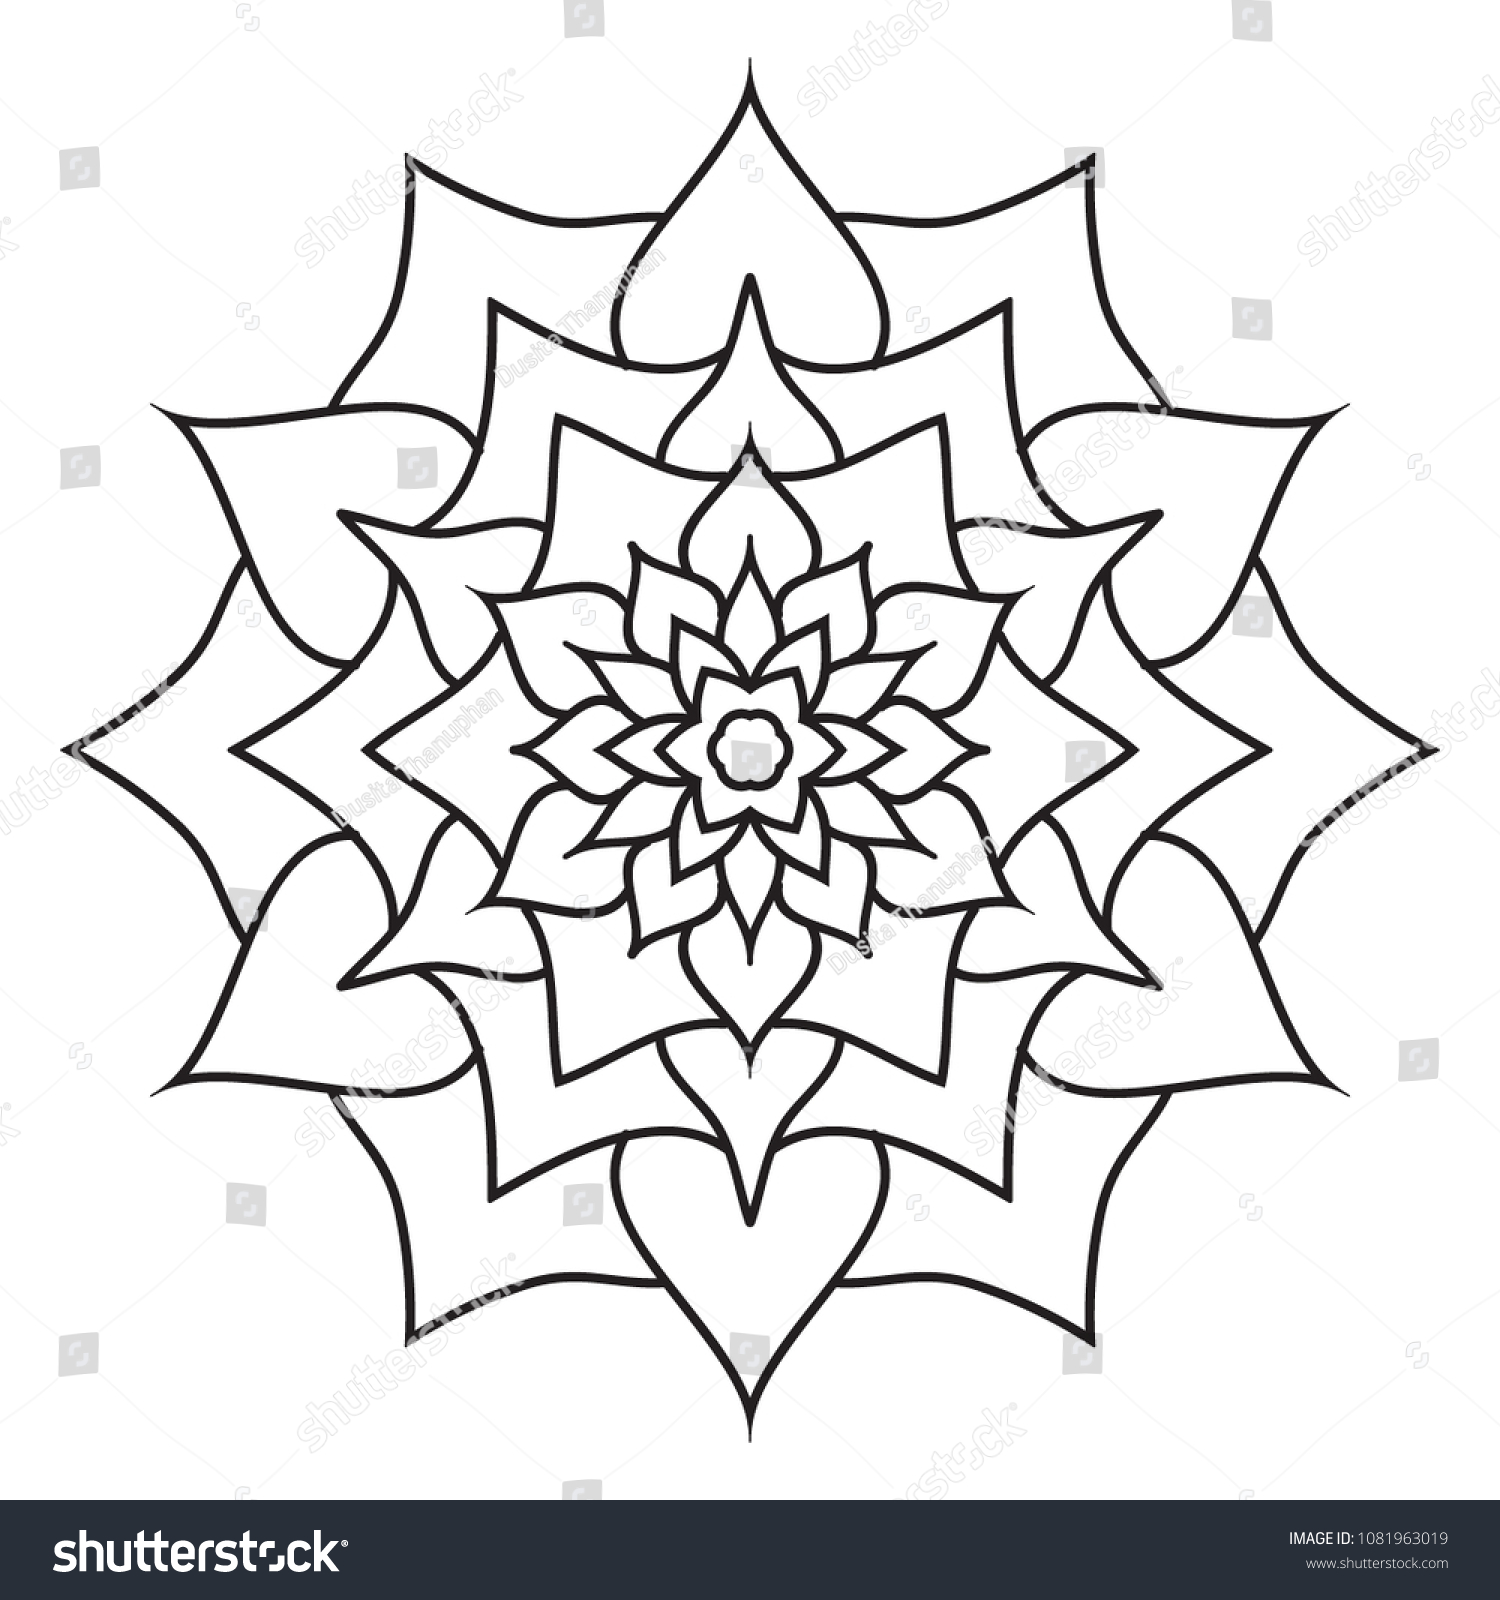 Easy Simple Mandalas Coloring Book Pages Stock Illustration ...